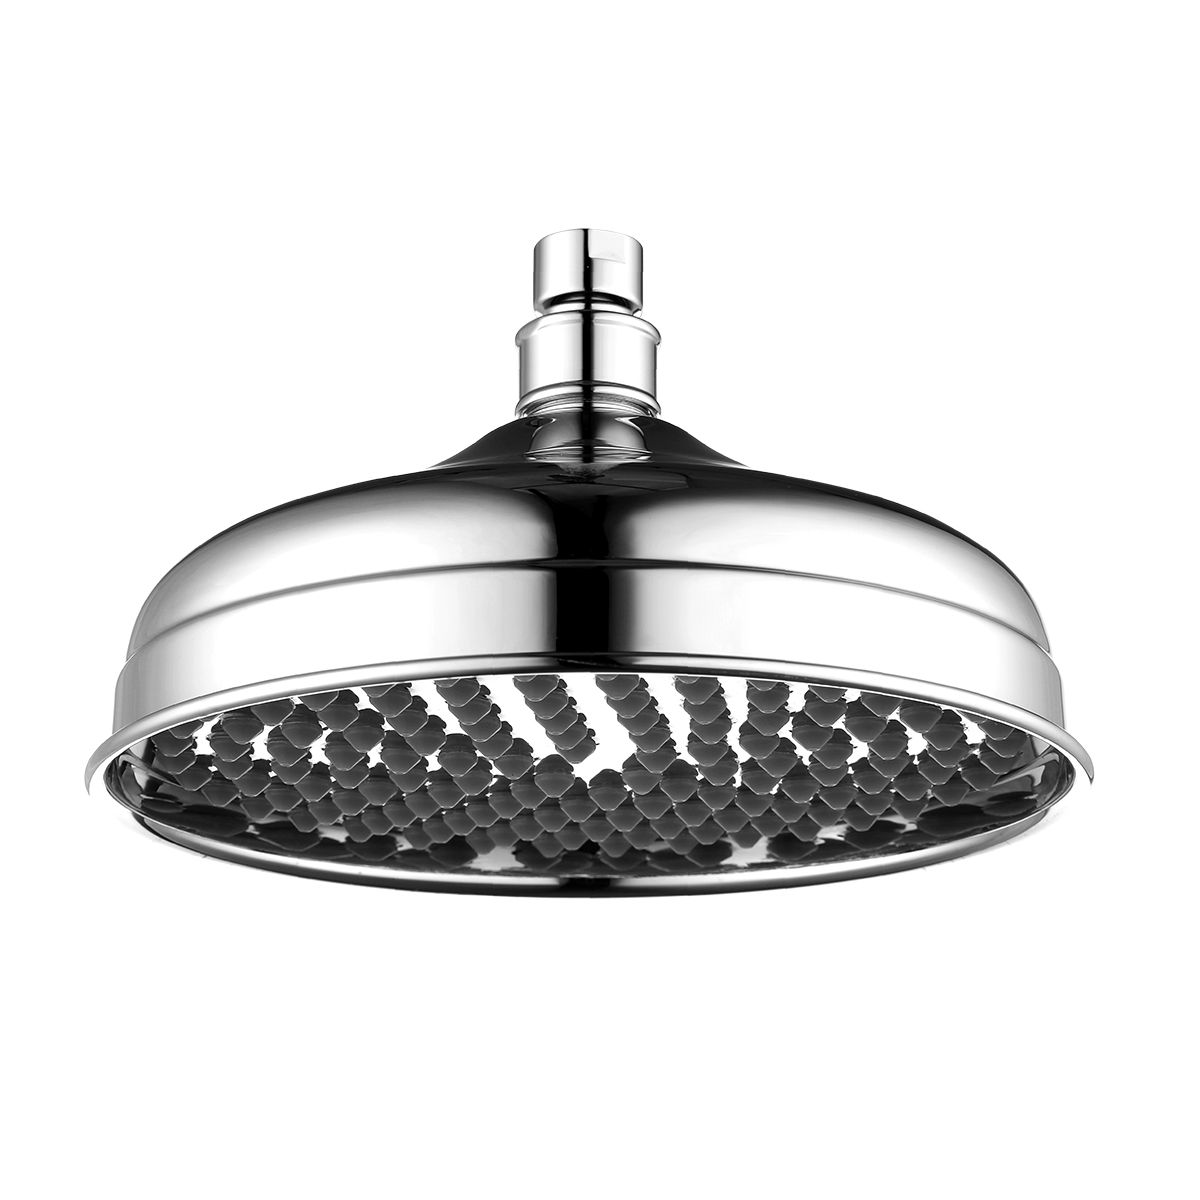 LM8989C Shower head 1-function